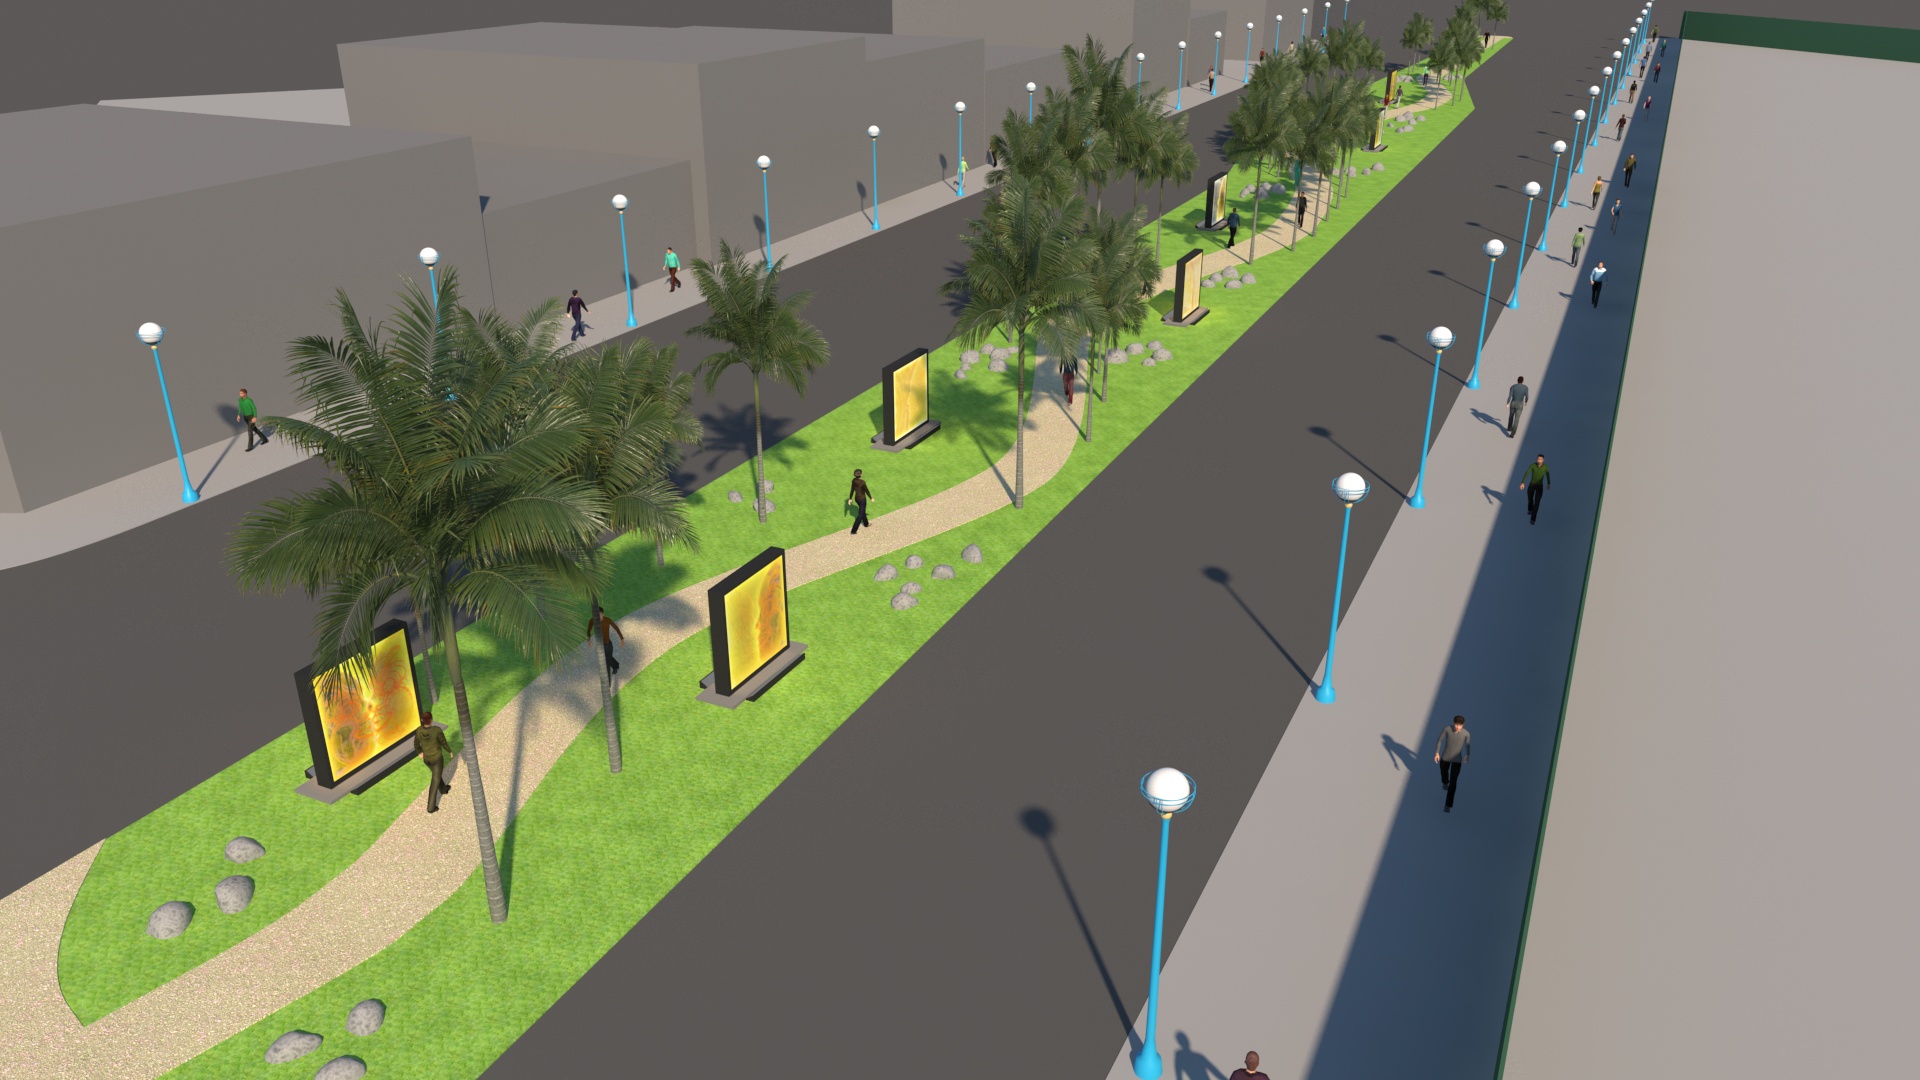 Proposed West Hollywood Luminous Public Art Exhibition Project